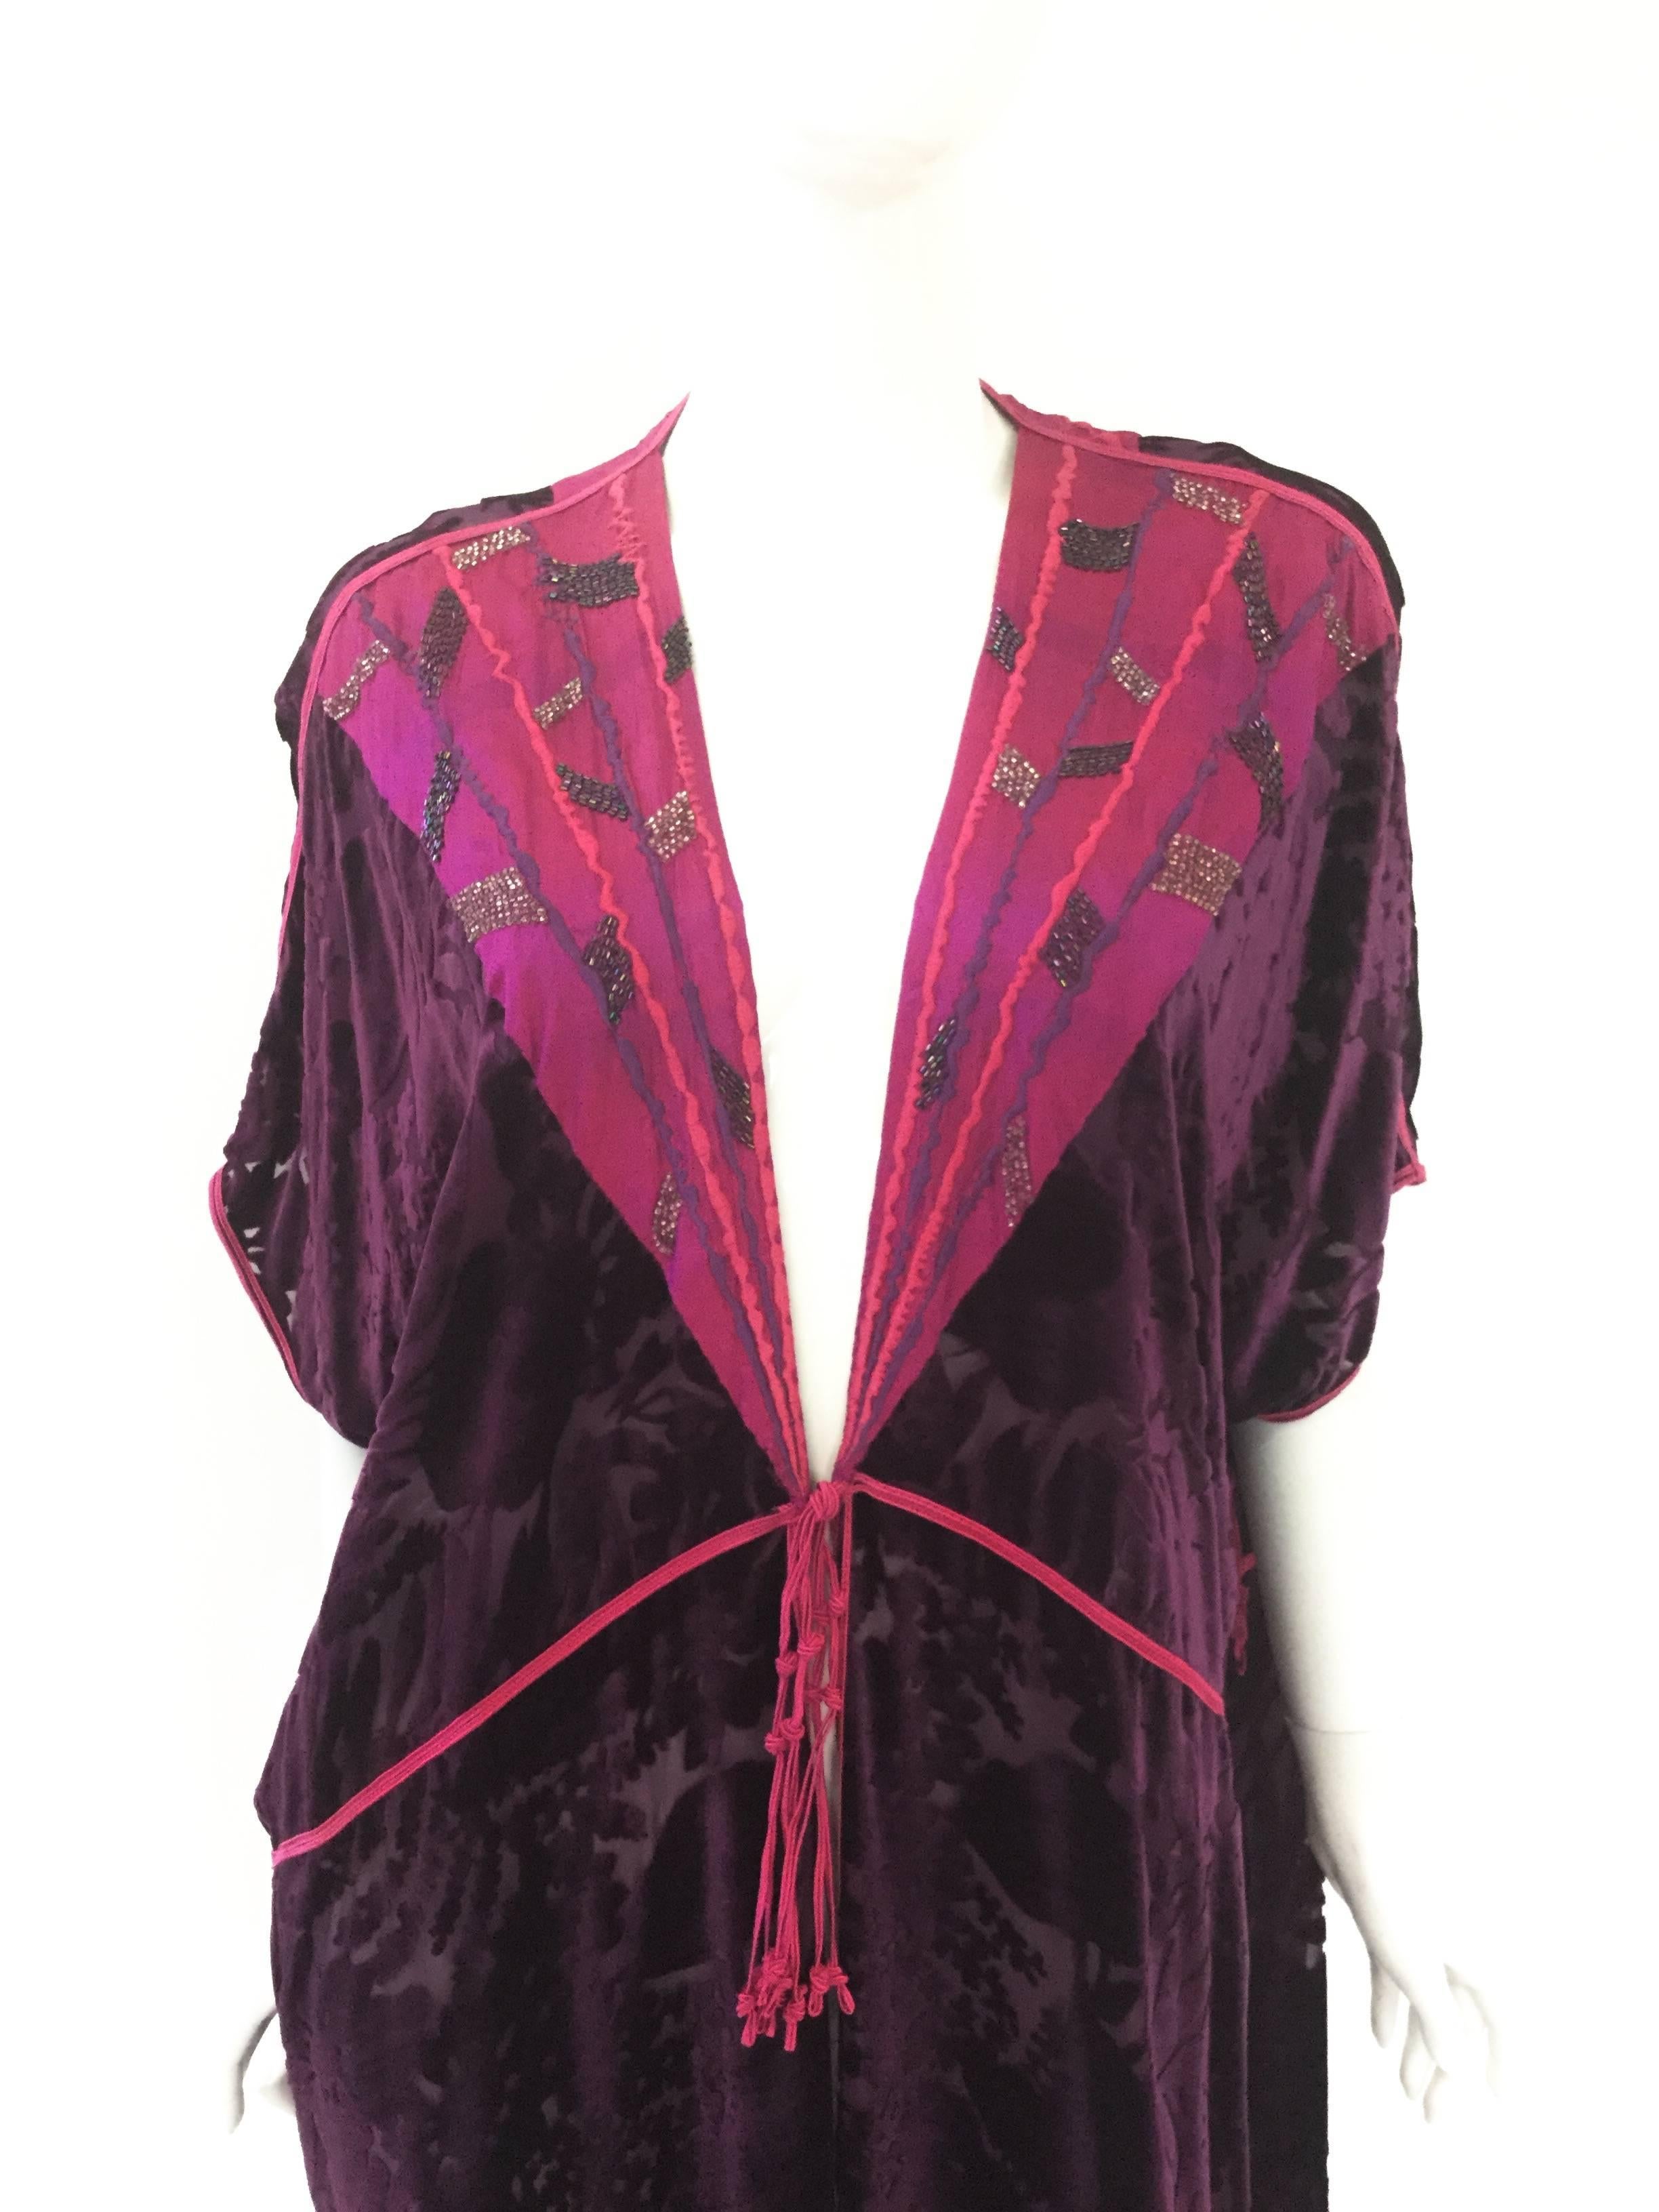 
Gorgeous Thea Porter Couture hostess gown. The gown is primarily composed of purple devoré burnout velvet in a floral motif. The gorgeous magenta fuchsia silk collar features pink and purple stripes running to the center of the gown. Purple and